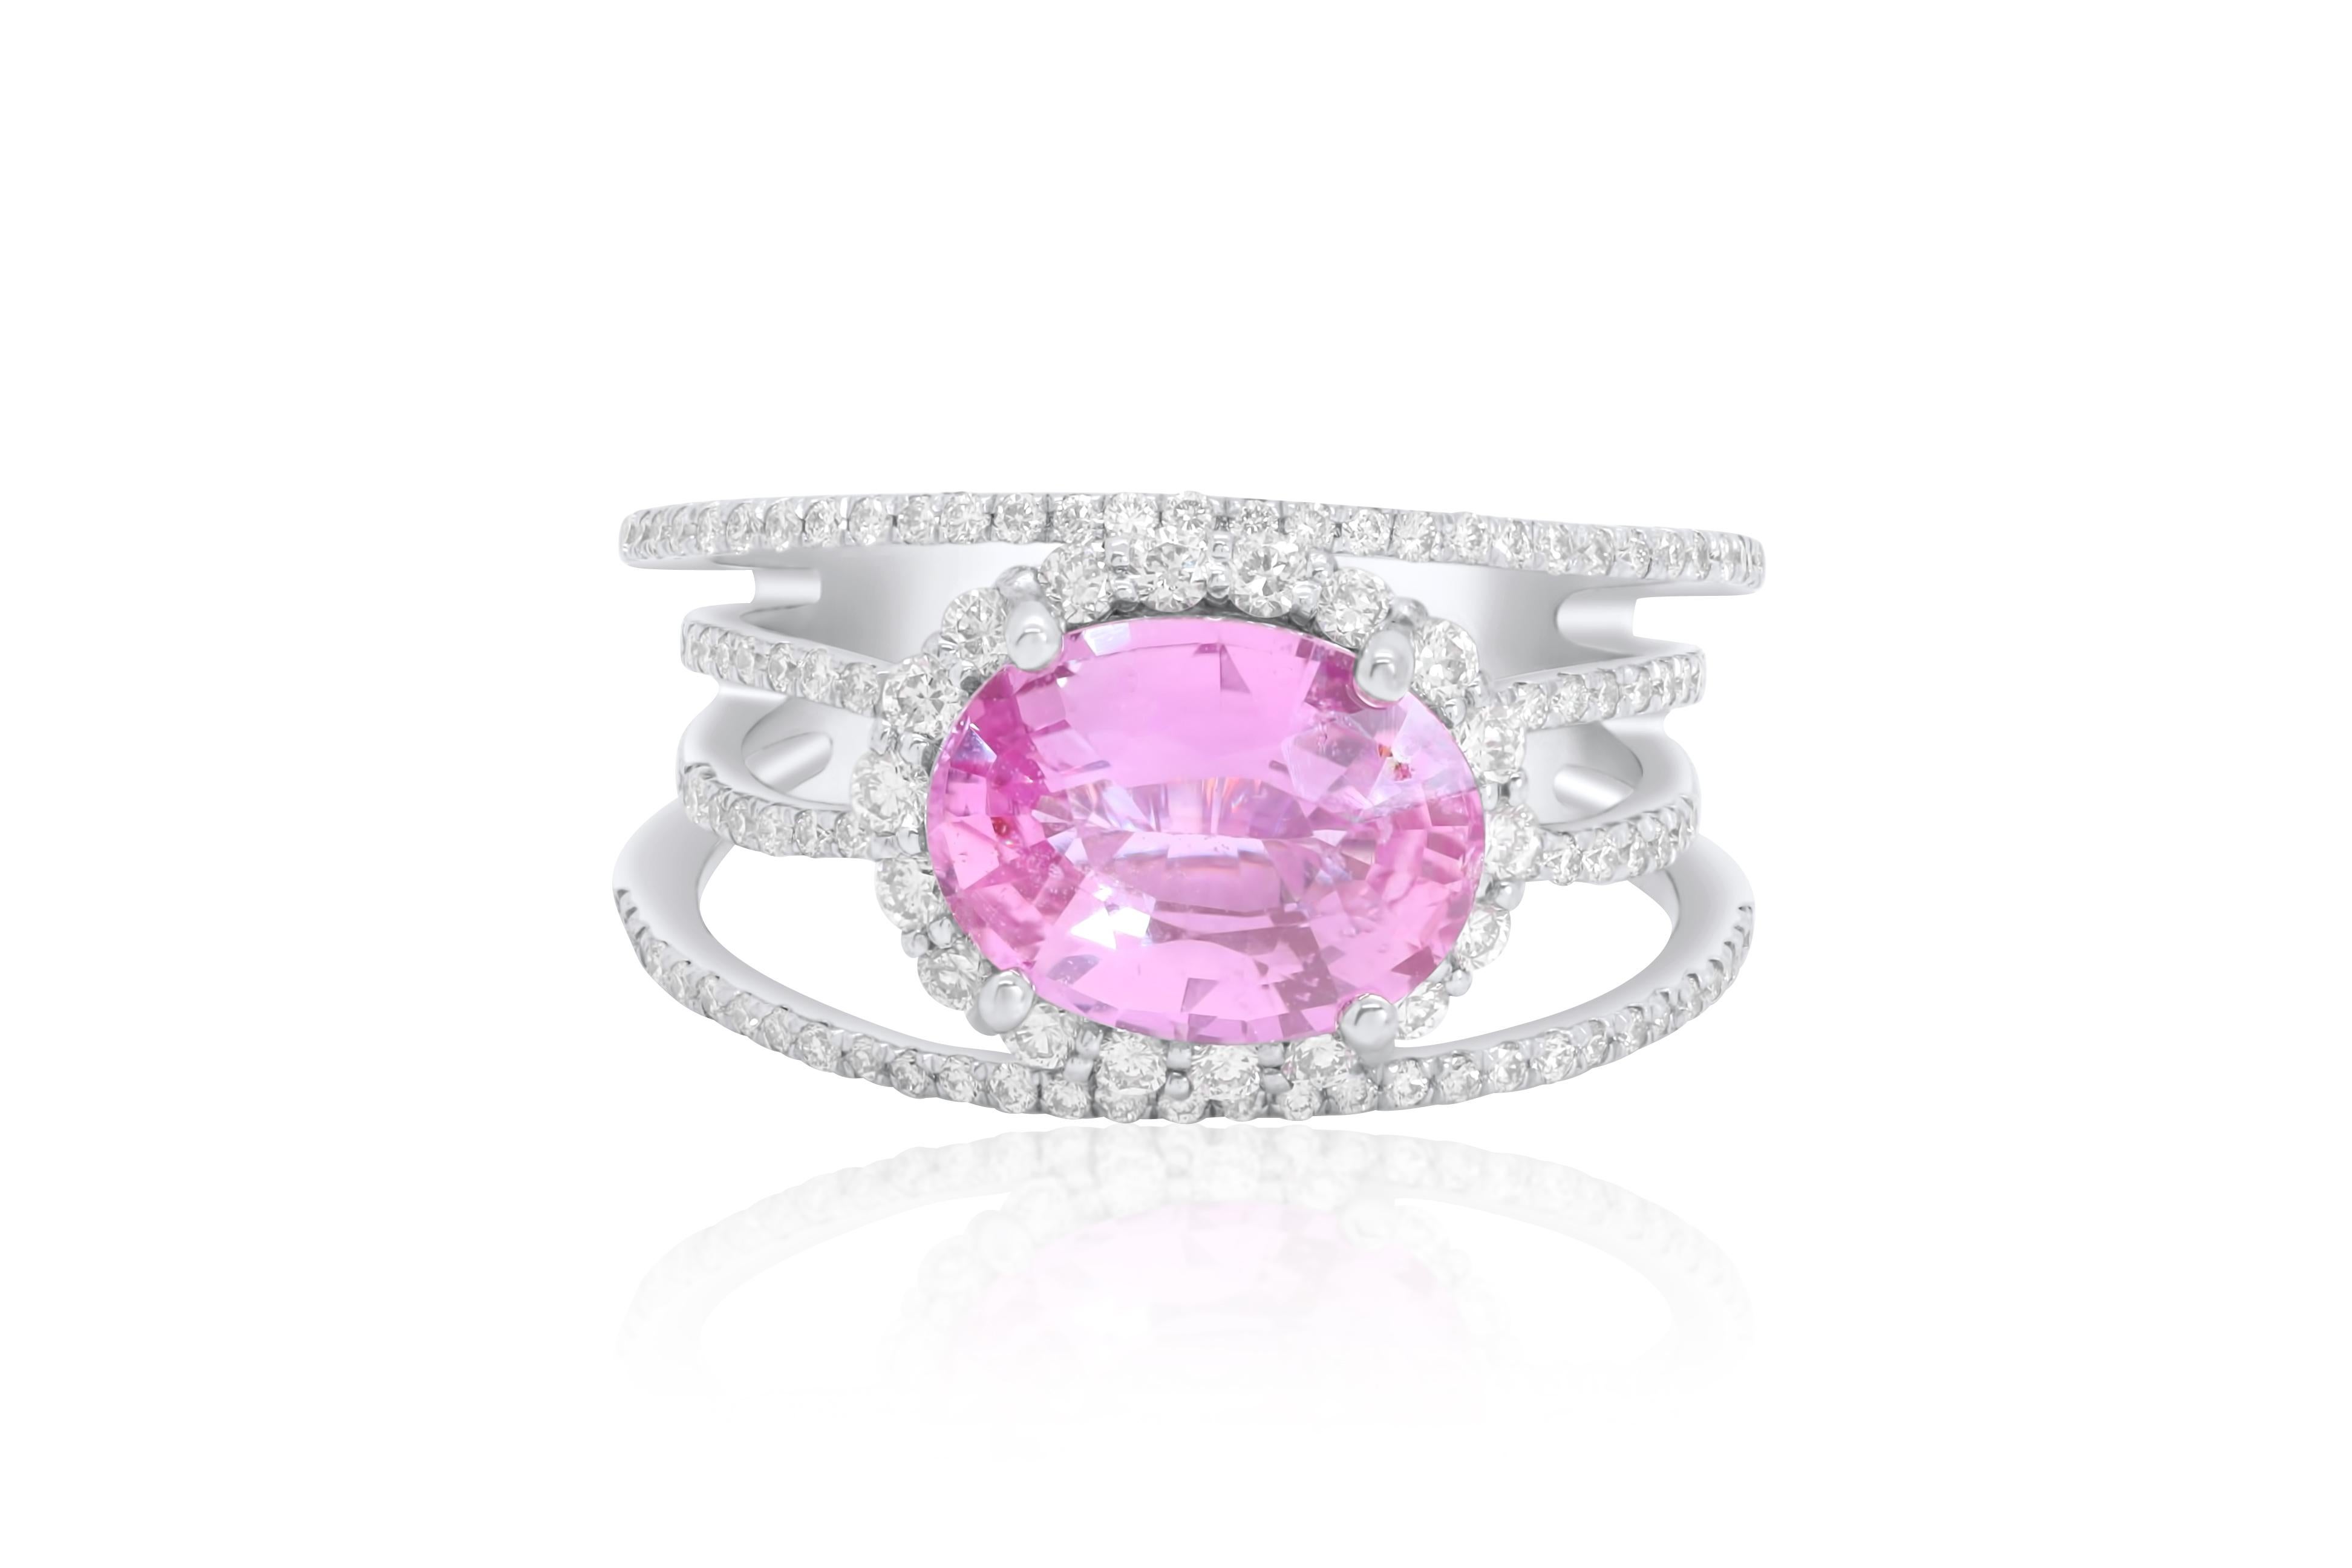 Modern Diana M. 18 kt white gold  pink sapphire diamond ring featuring a 2.86 ct For Sale